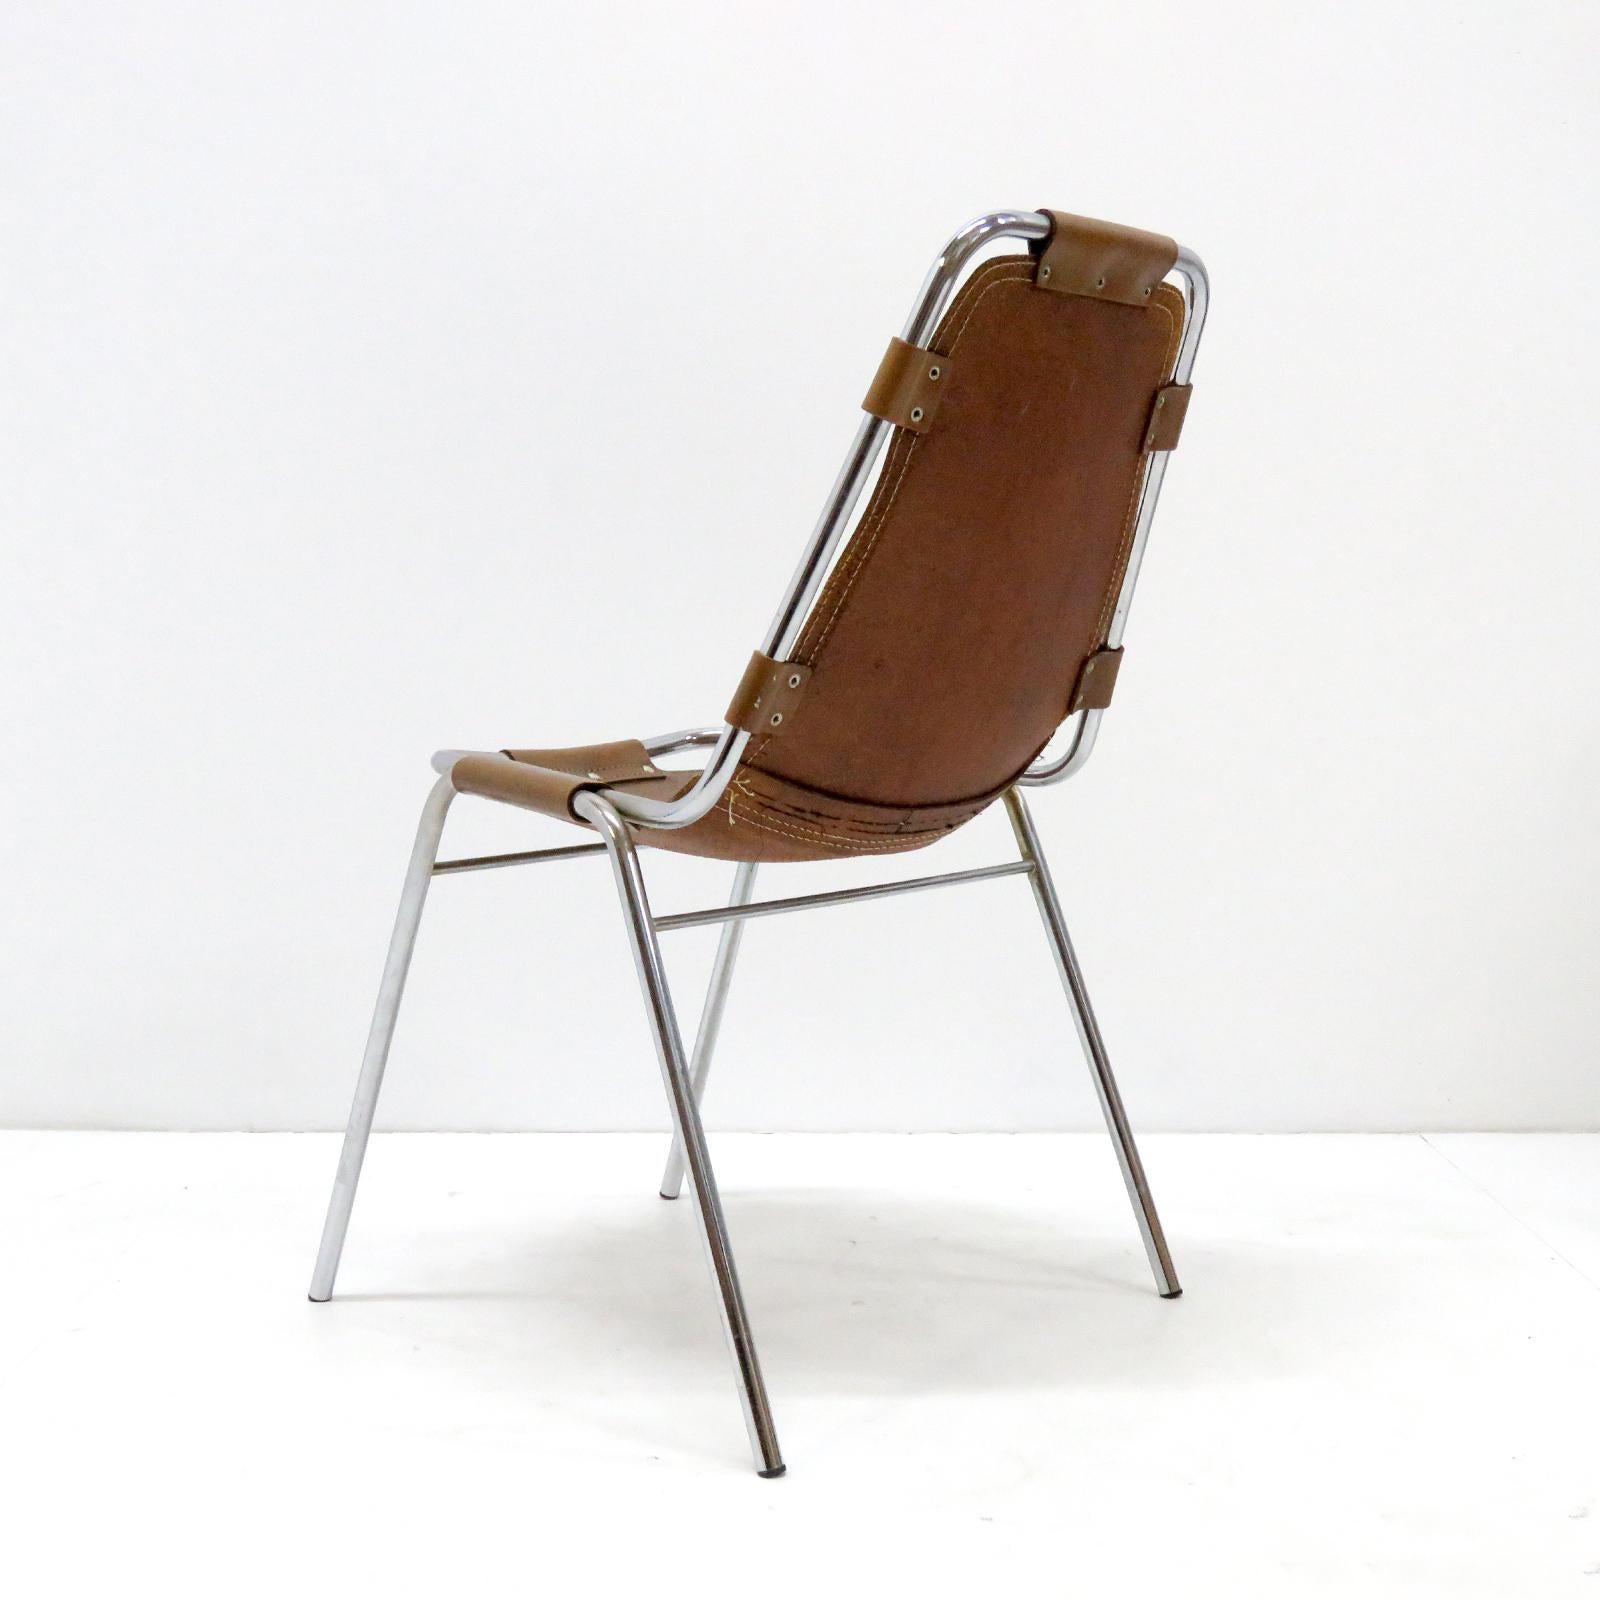 Leather “Les Arc” Chairs Selected by Charlotte Perriand